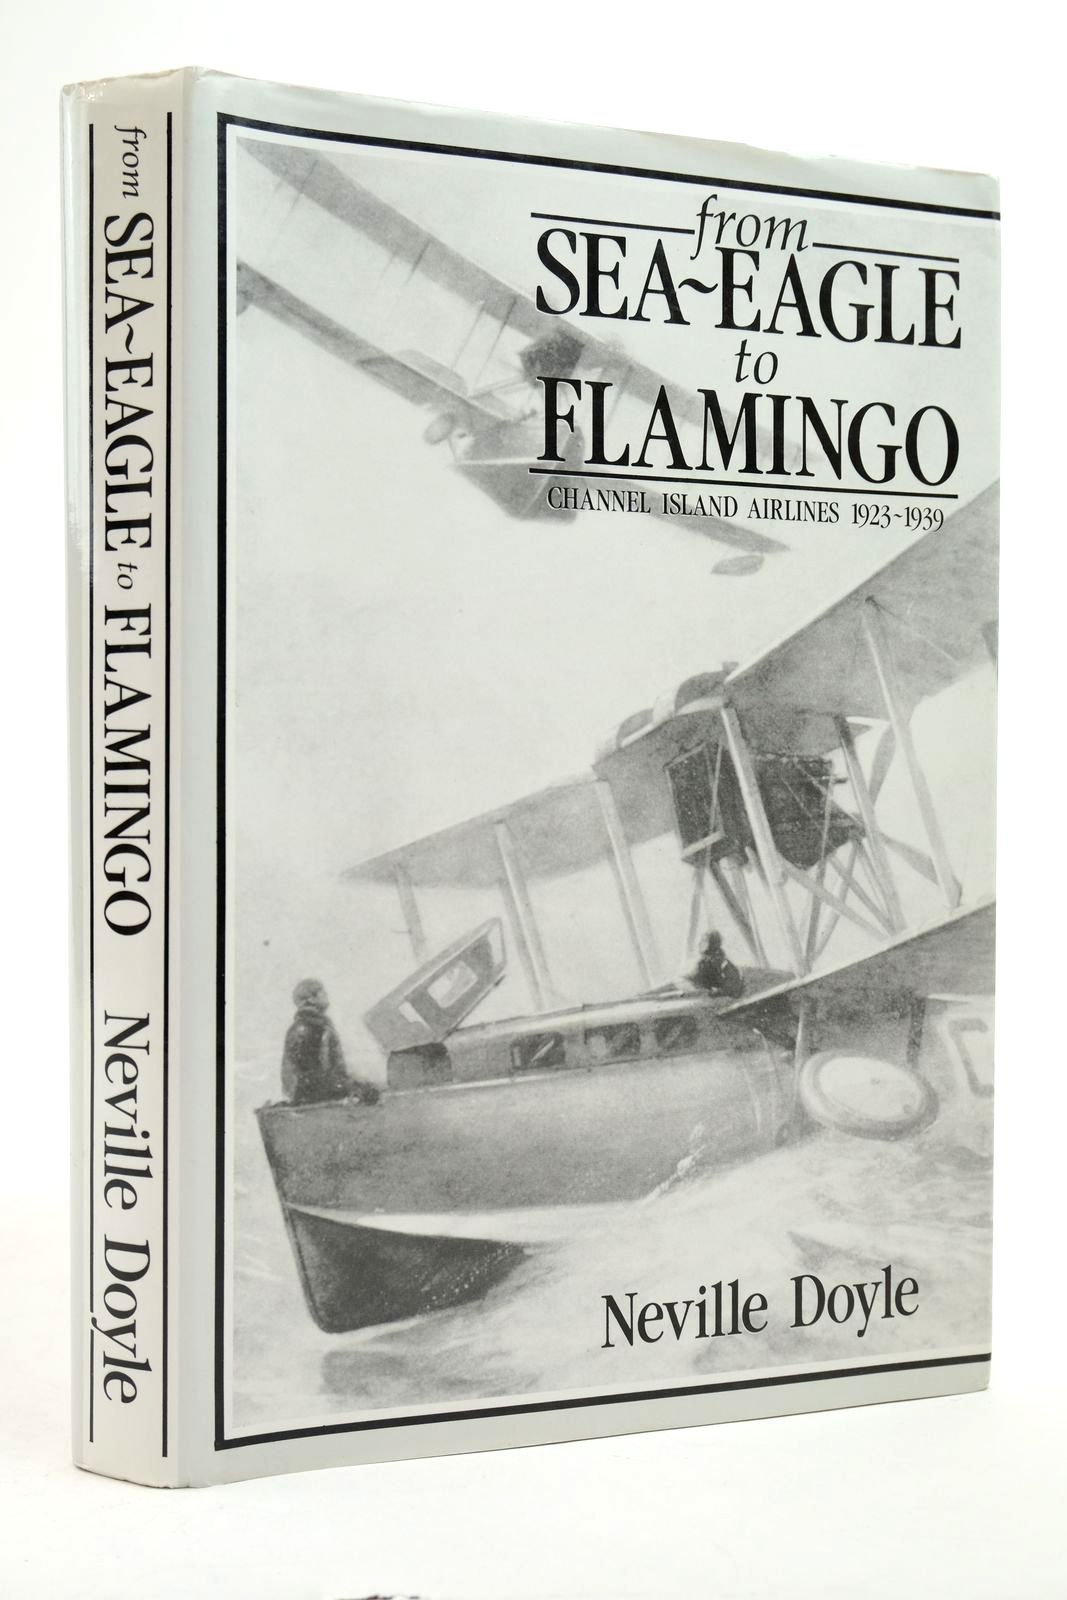 Photo of FROM SEA-EAGLE TO FLAMINGO written by Doyle, Neville published by The Self Publishing Association Ltd. (STOCK CODE: 2139116)  for sale by Stella & Rose's Books